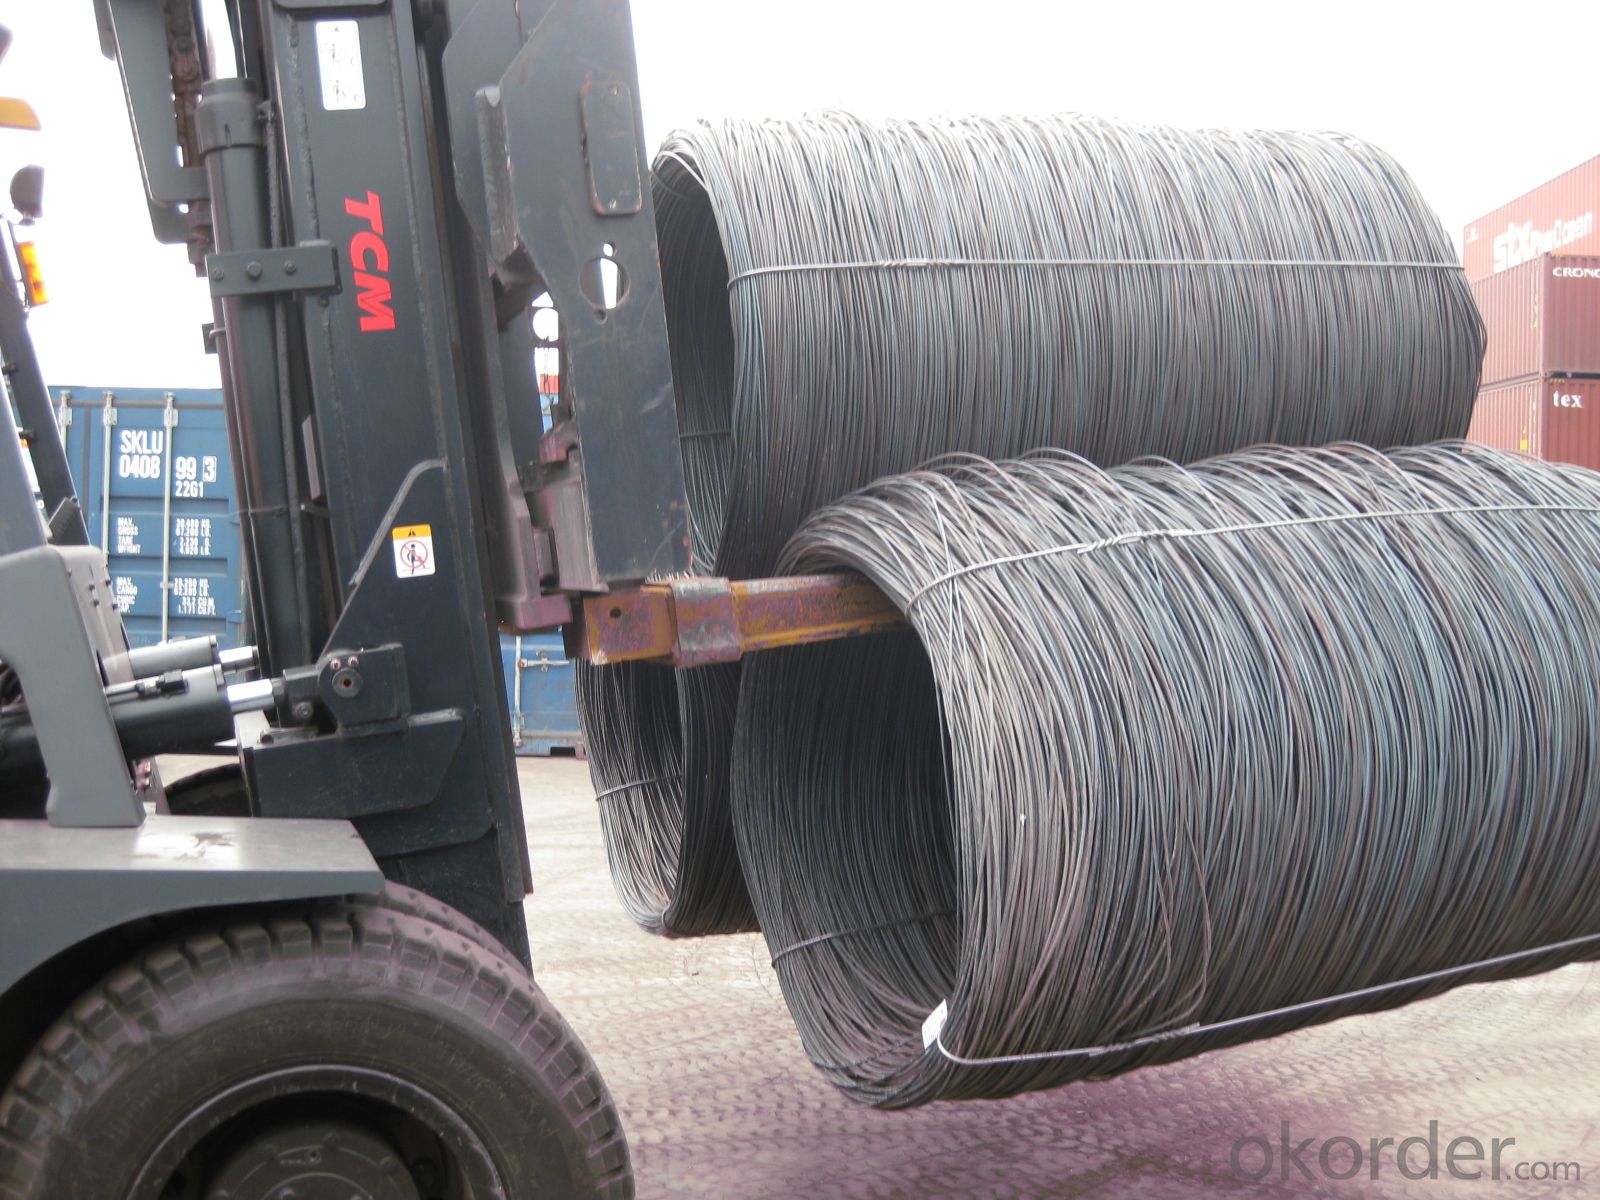 SAE1006Cr Carbon Steel Wire Rod 10mm for Welding